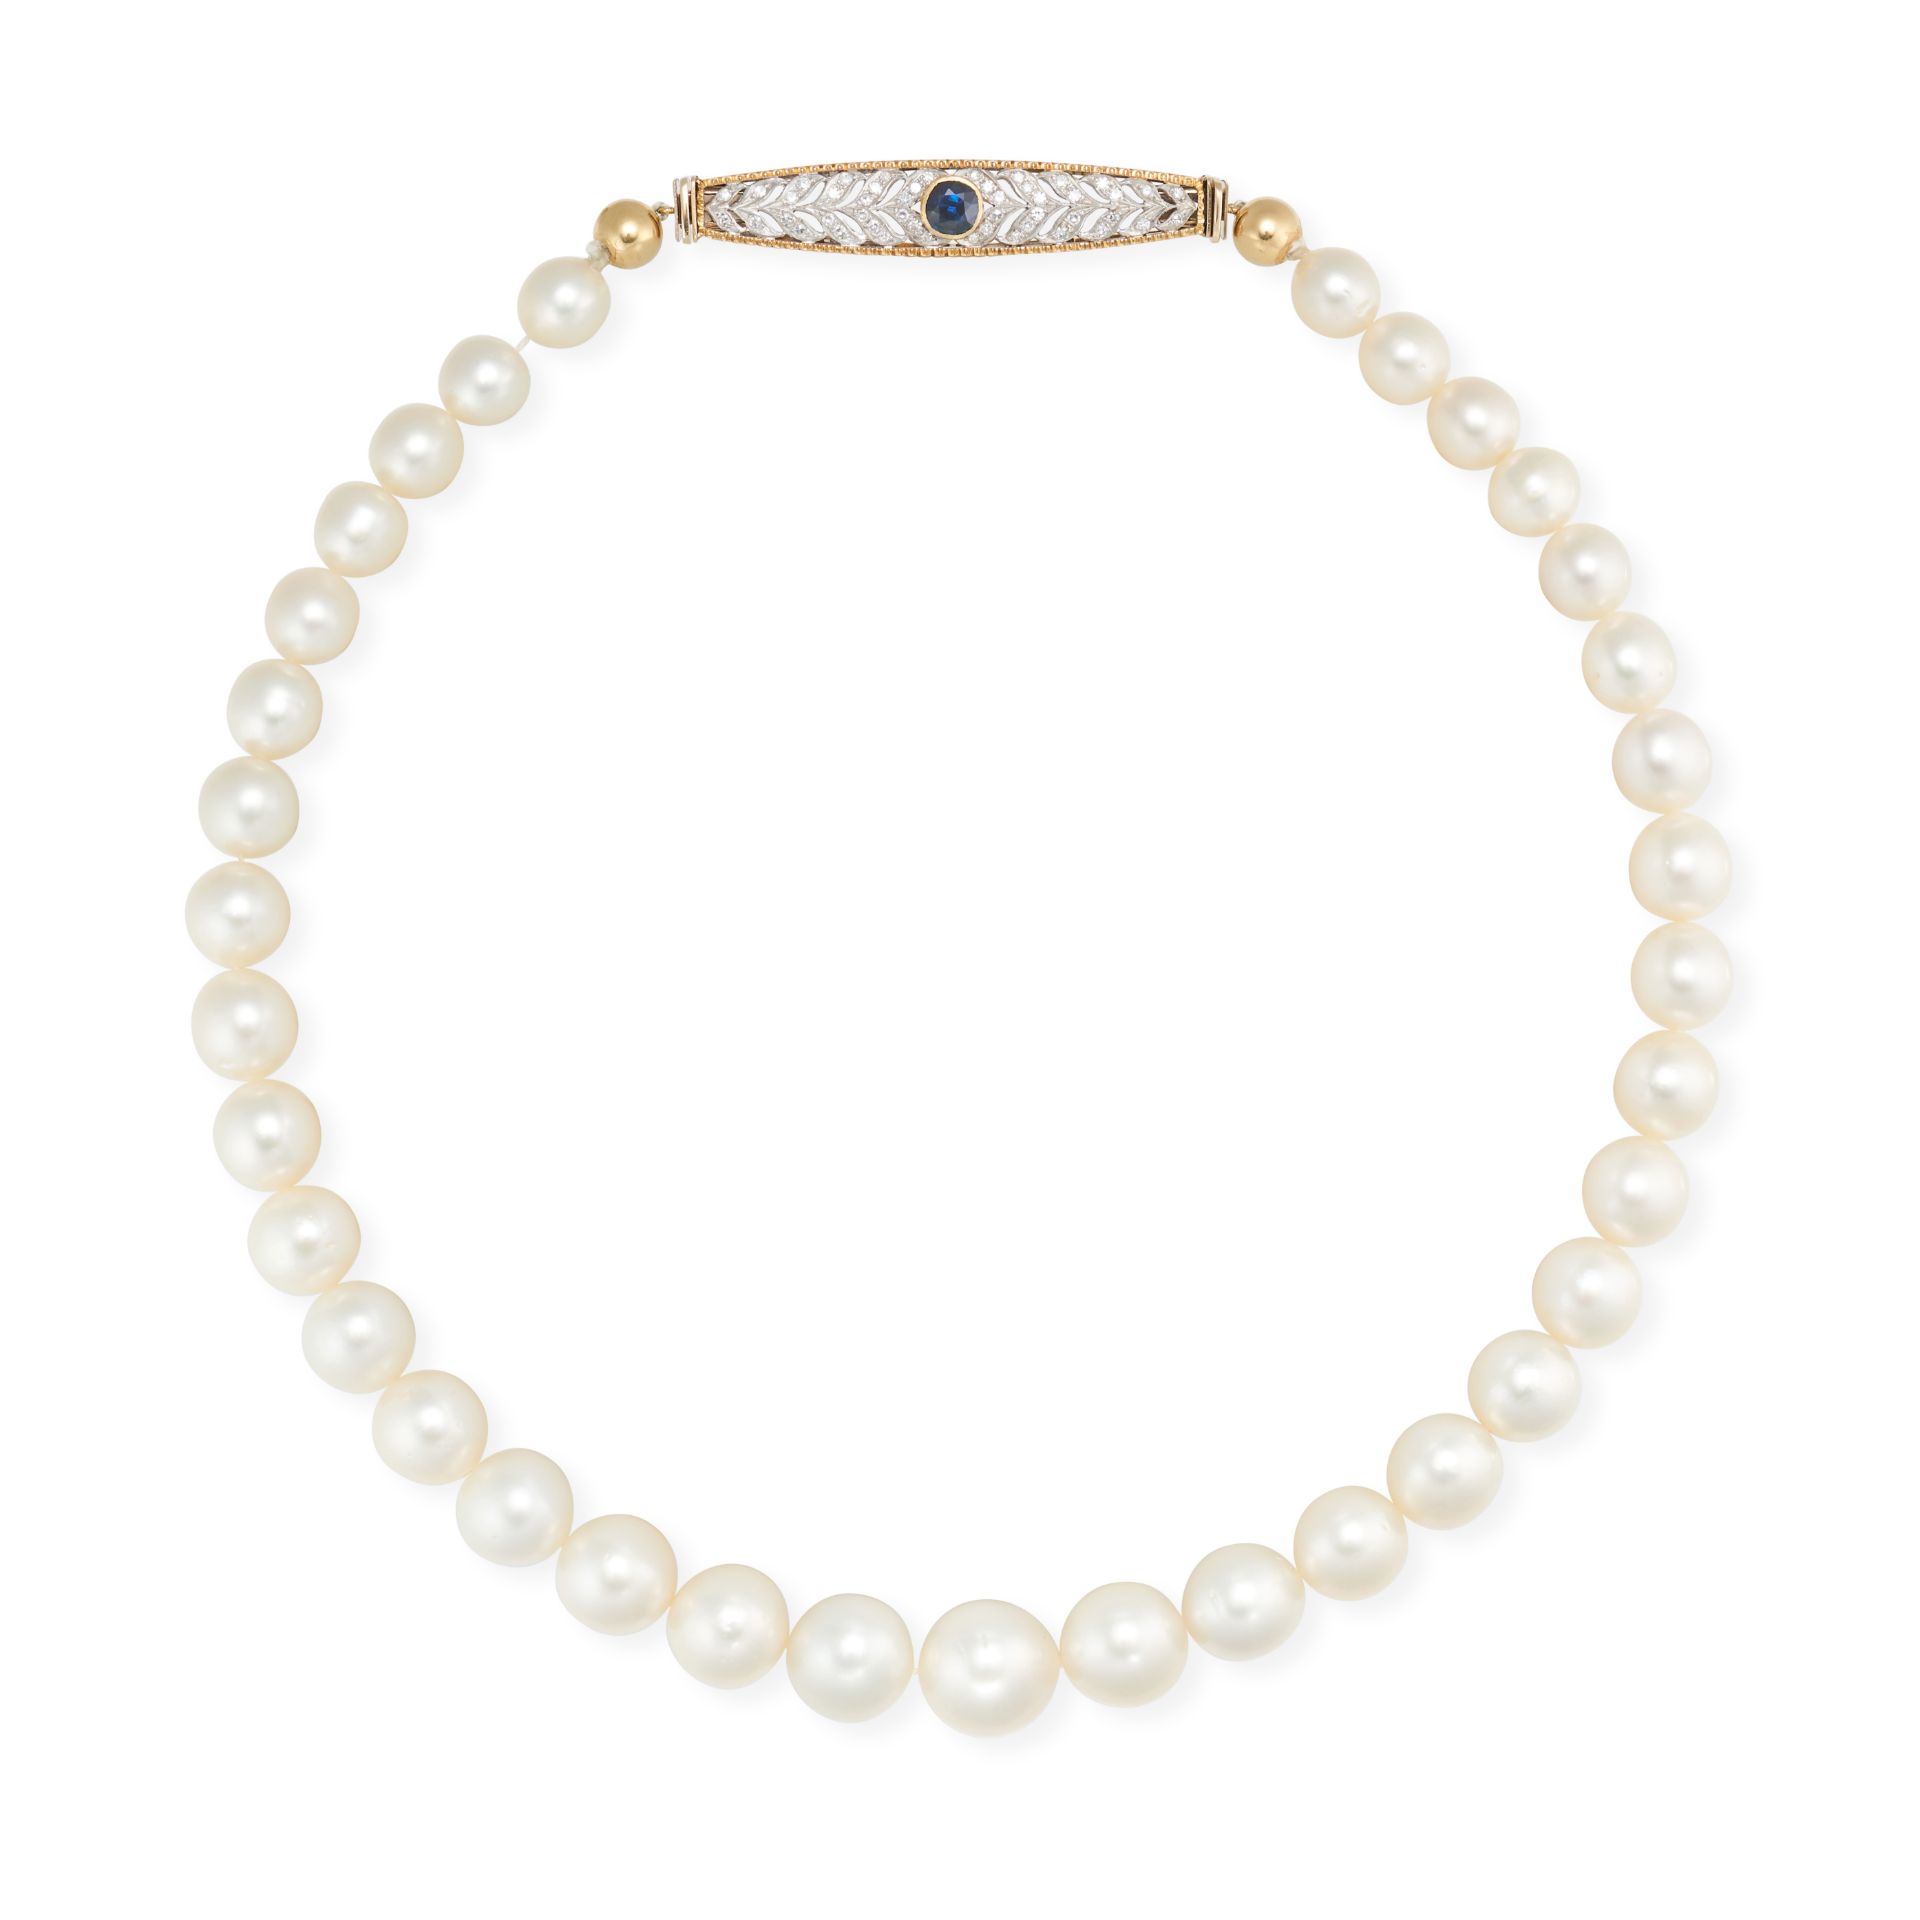 A SAPPHIRE, DIAMOND AND PEARL NECKLACE comprising a single row of pearls ranging from 10.0-14.9mm...